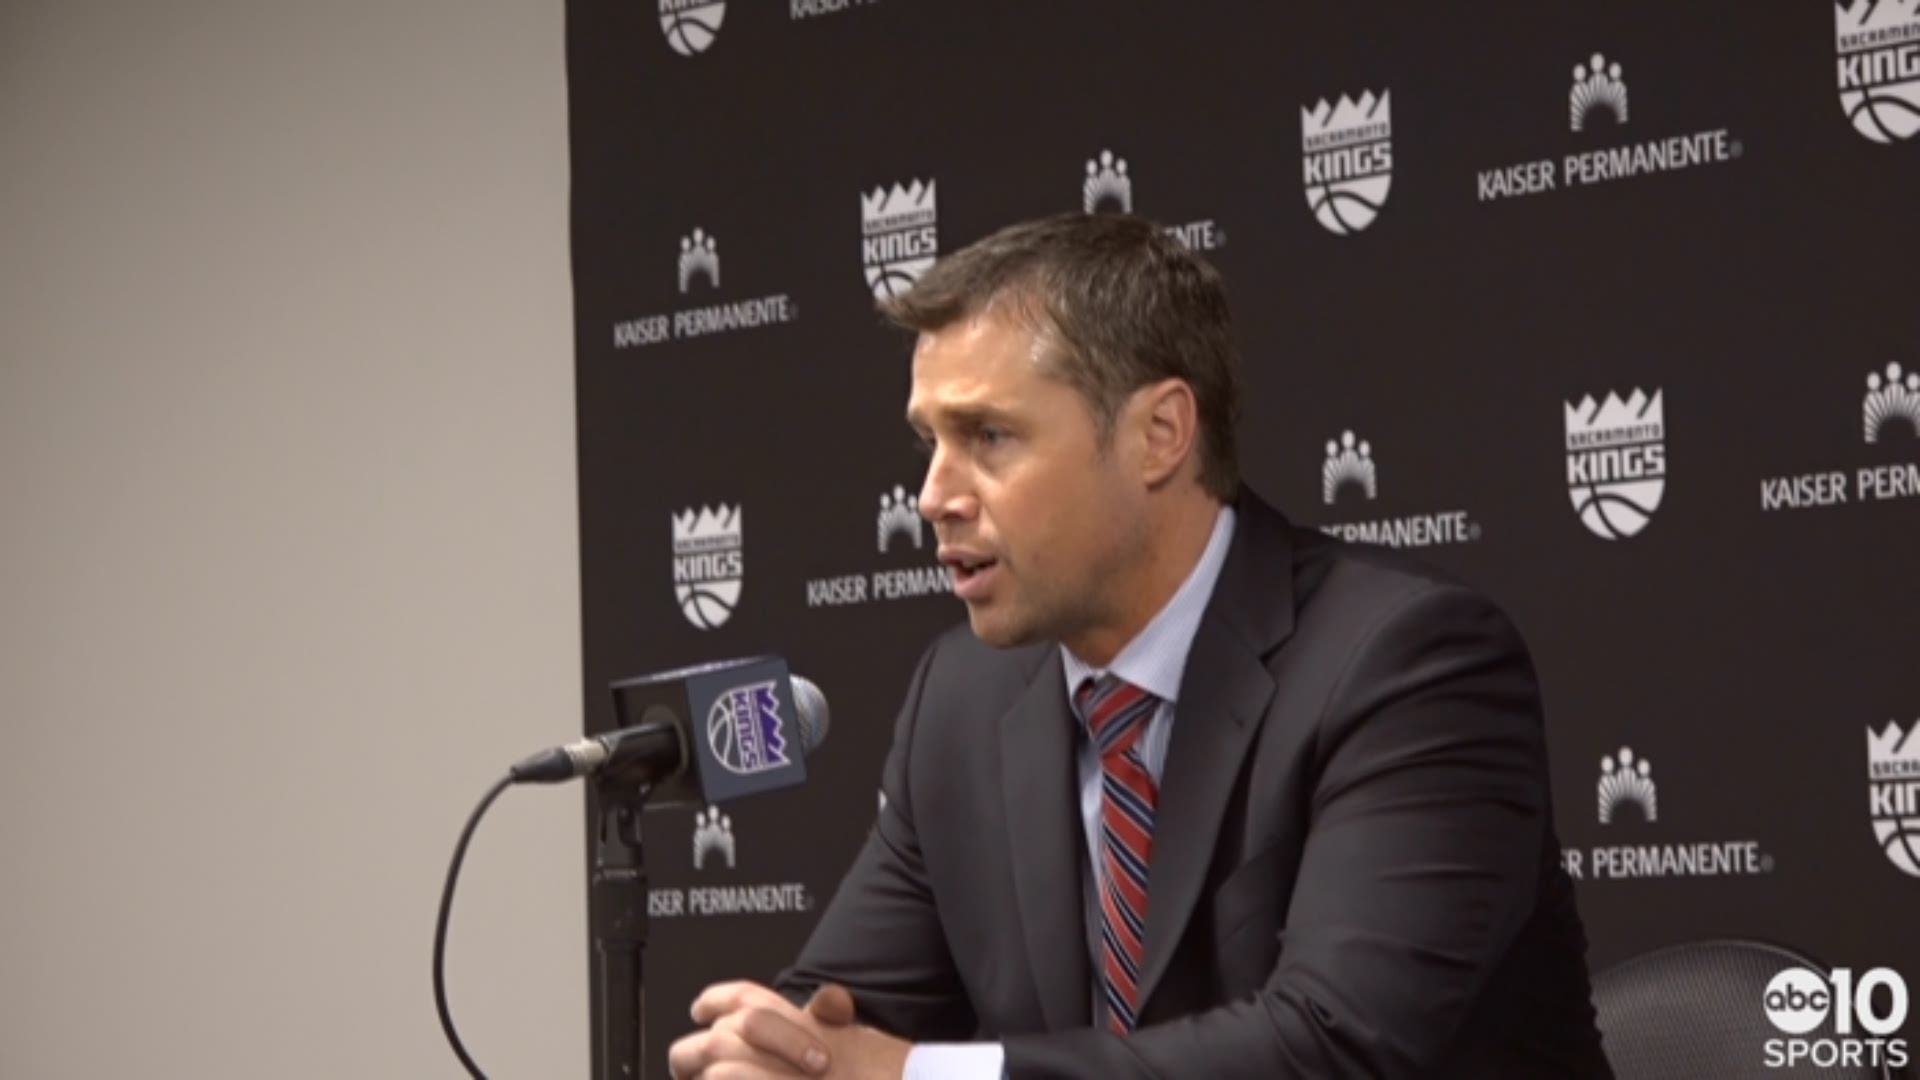 Kings head coach Dave Joerger talks about his team's lack of defense in Thursday's loss to the Los Angeles Clippers, finishing the month with an overall record of 10-11 and playing Bogdan Bogdanovic more as a point guard.